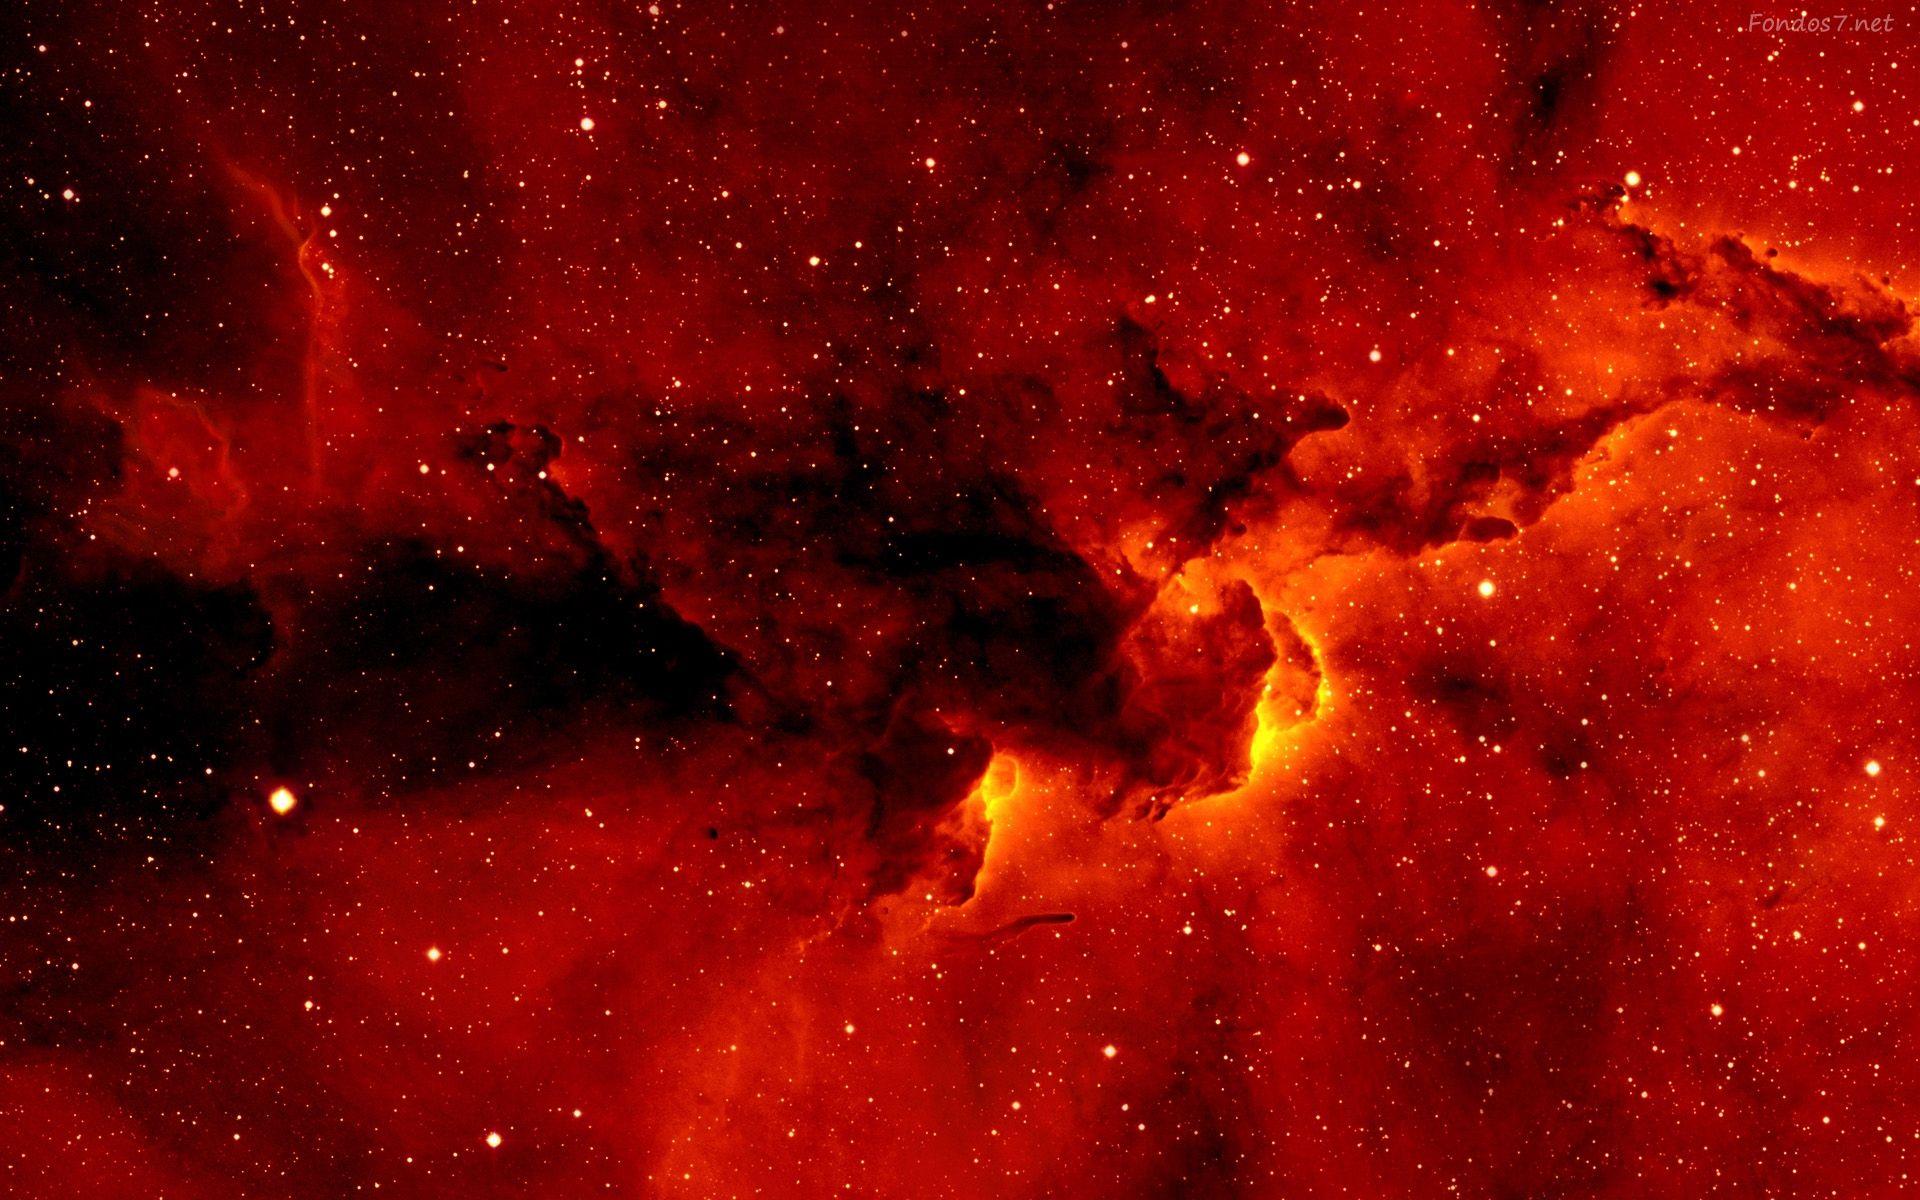 Black and Red Space Wallpapers - Top Free Black and Red Space